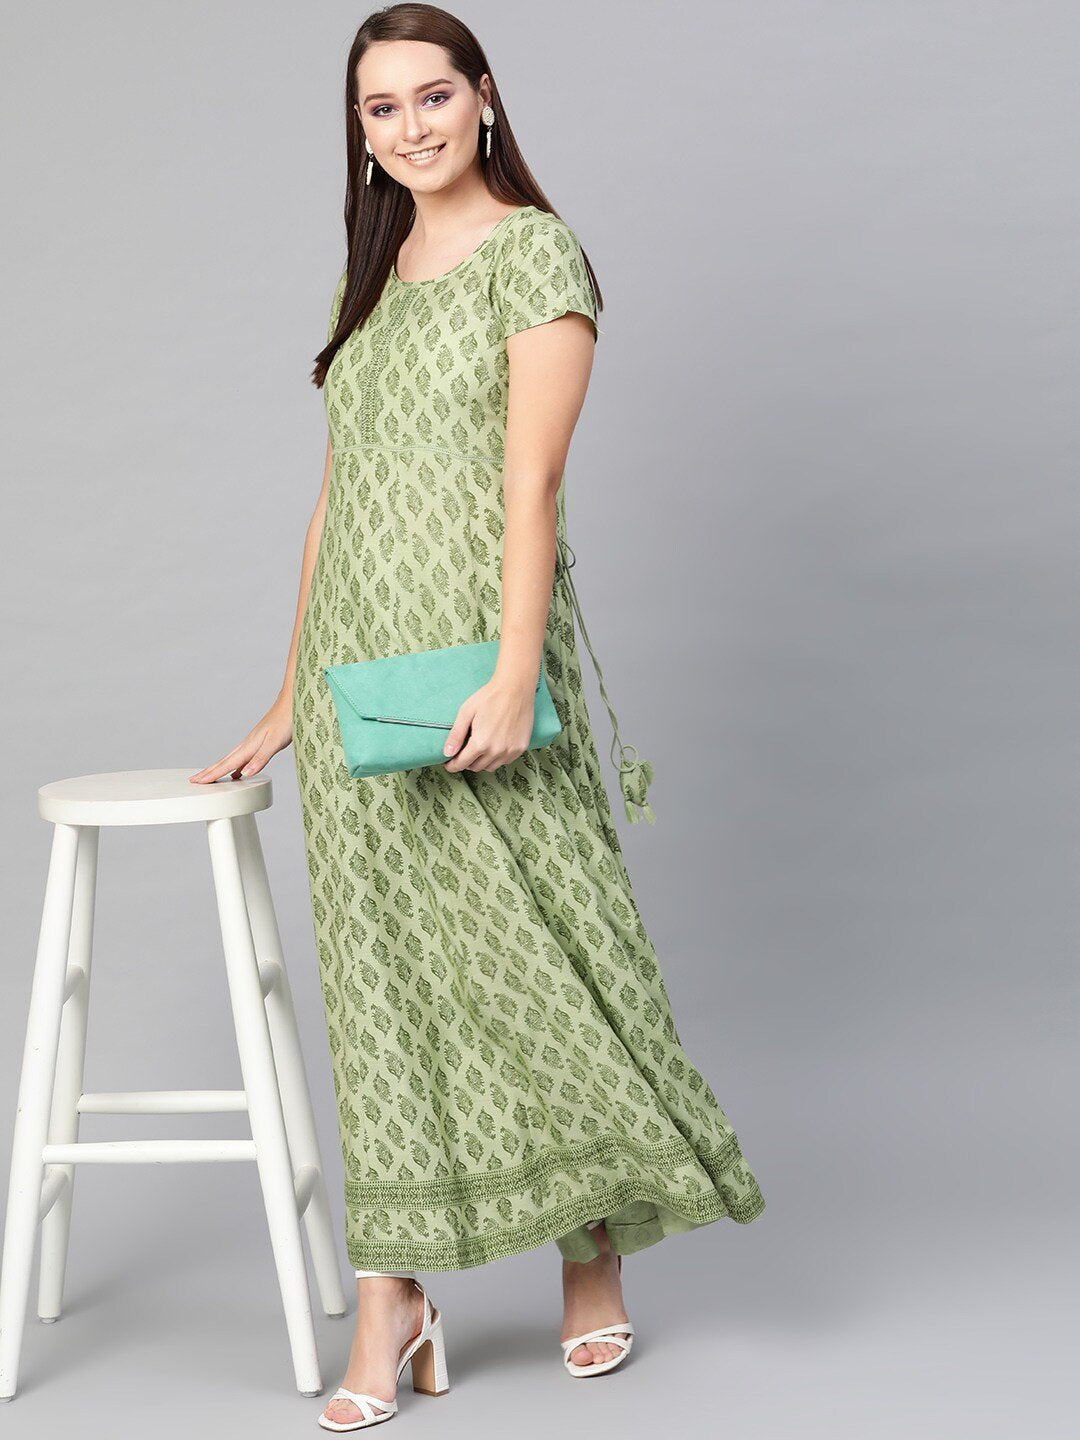 Women's  Green Printed Fit and Flare Dress - AKS